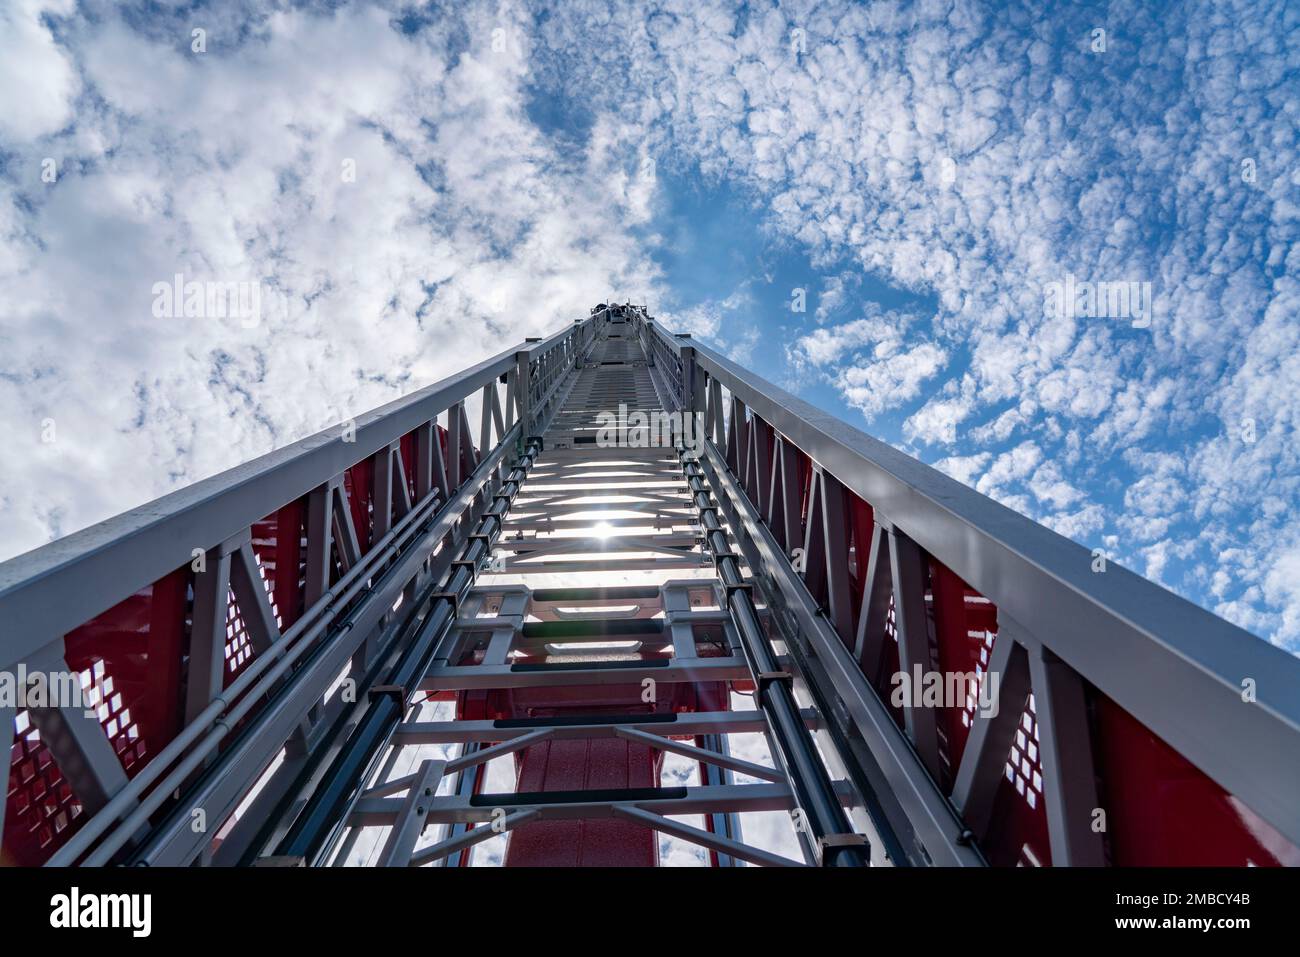 Turntable ladder, vehicles, equipment, outdoor area at the trade fair Interschutz 2022 in Hanover, the world's largest trade fair for fire brigade, re Stock Photo